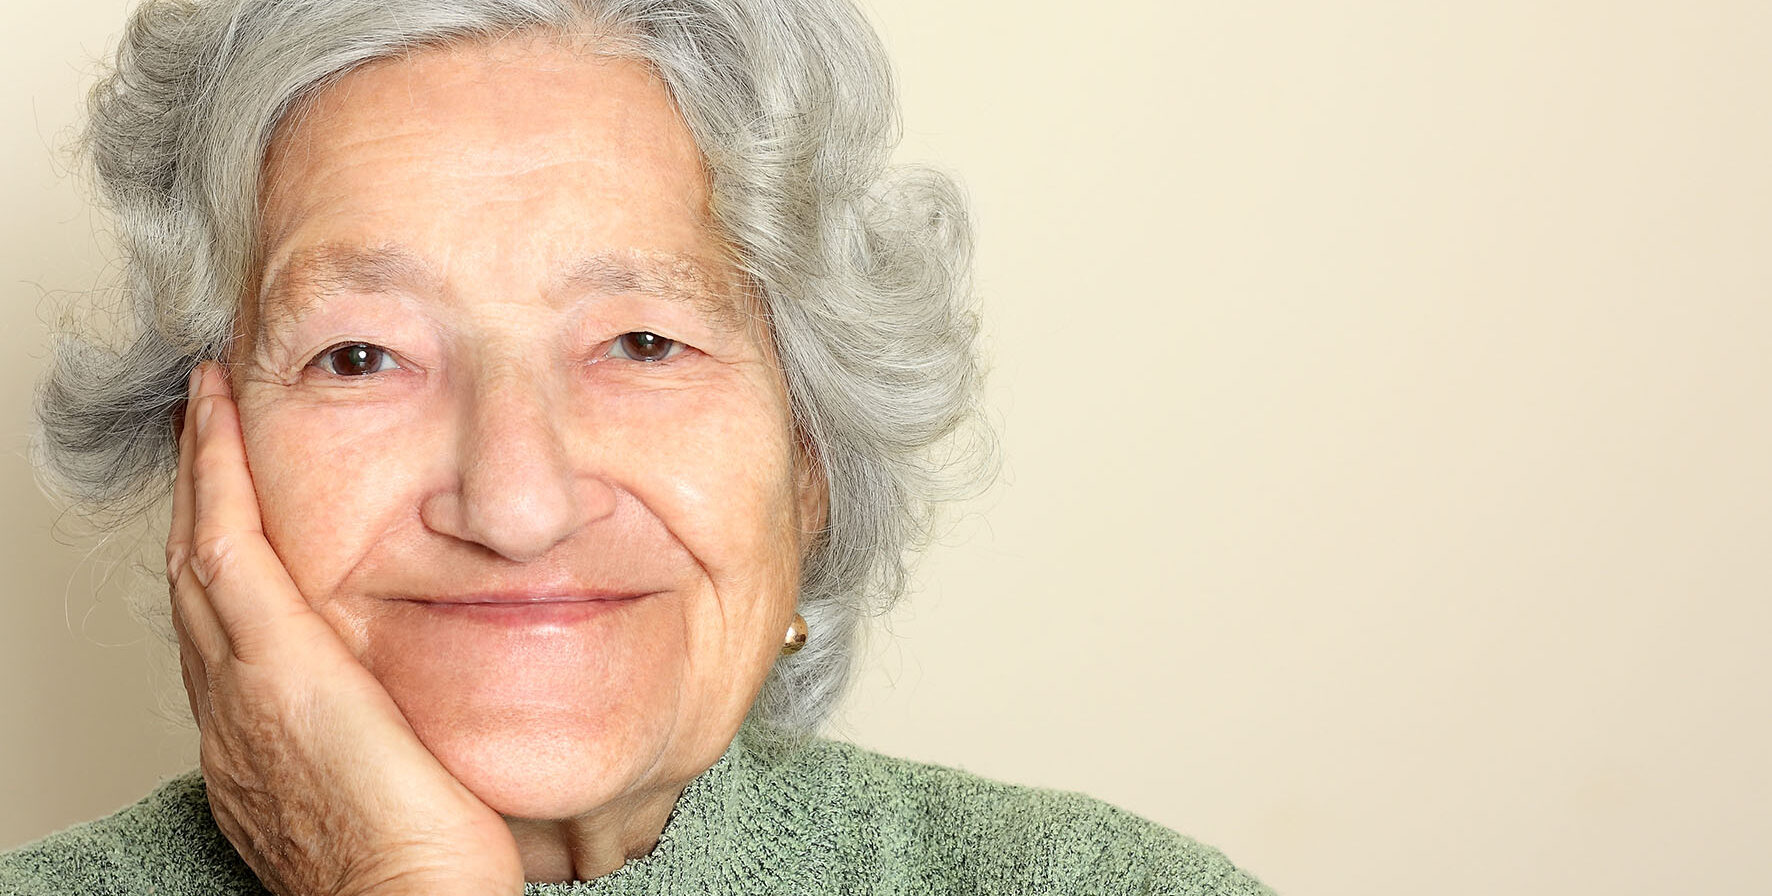 A close-up image of an older lady smiling. She has her chin rested on her hand.